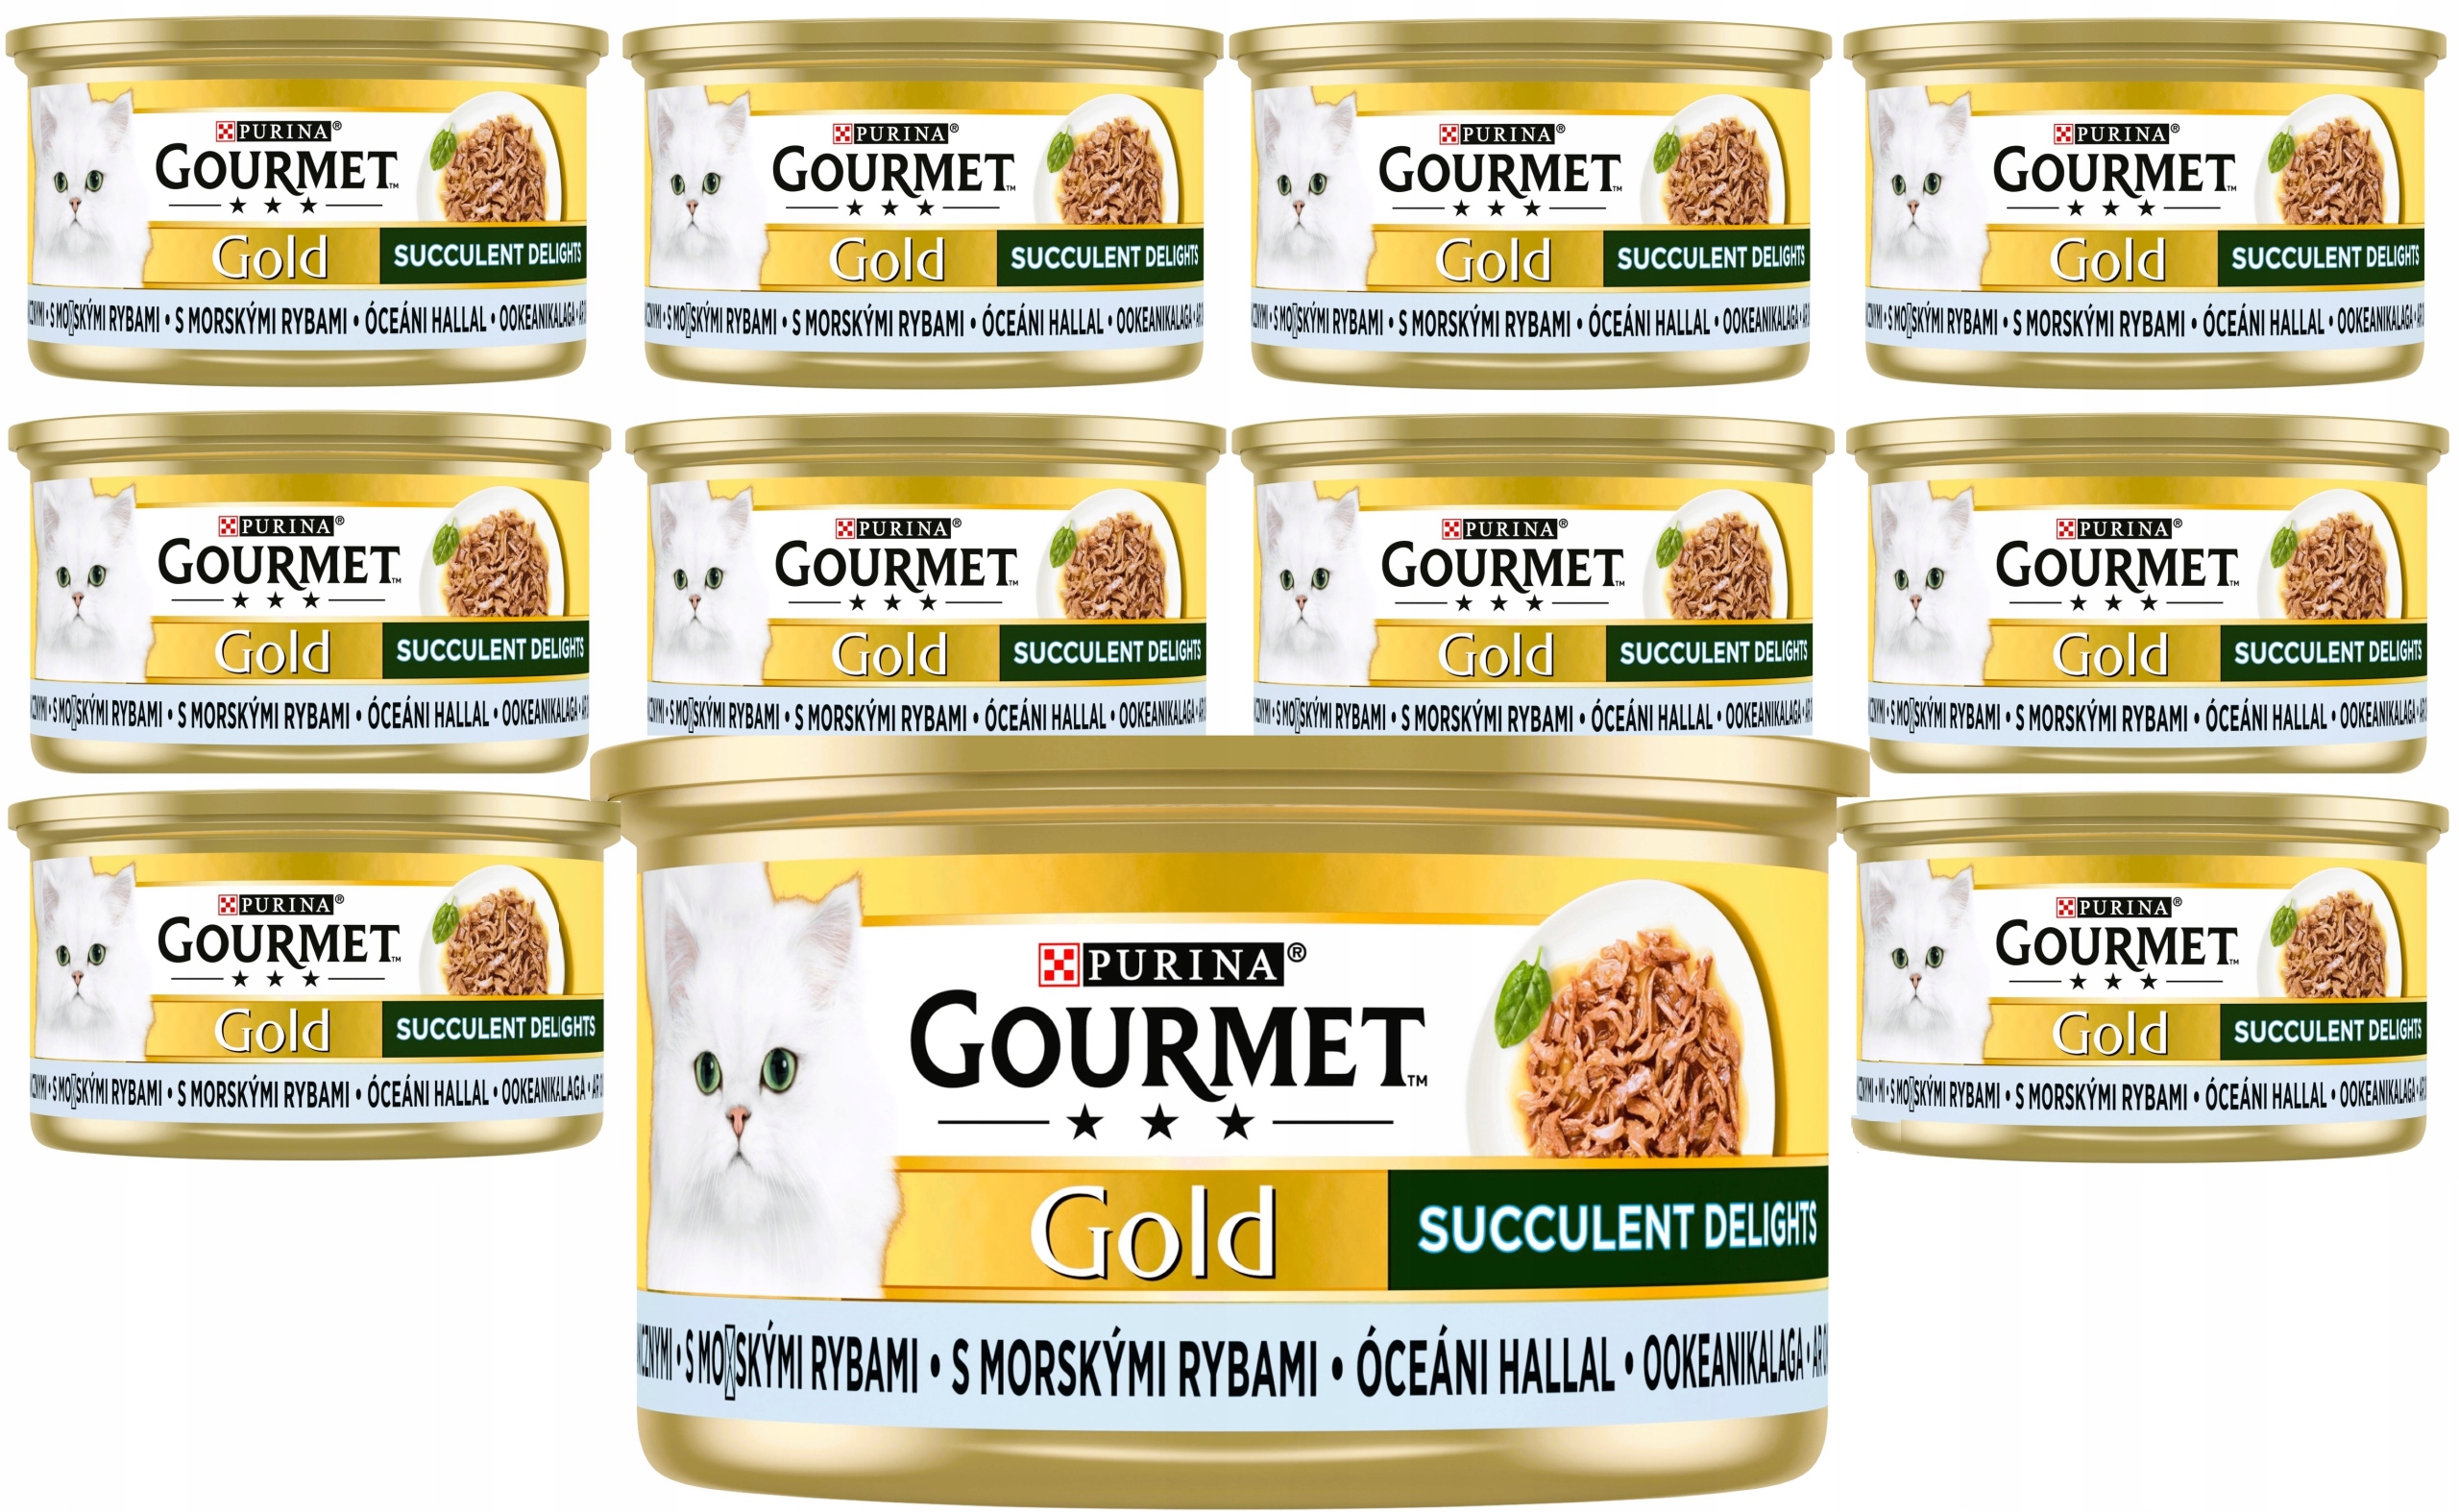 Purina Gourmet Gold Succulent Delights Multipack (12 x 8 x 85 g